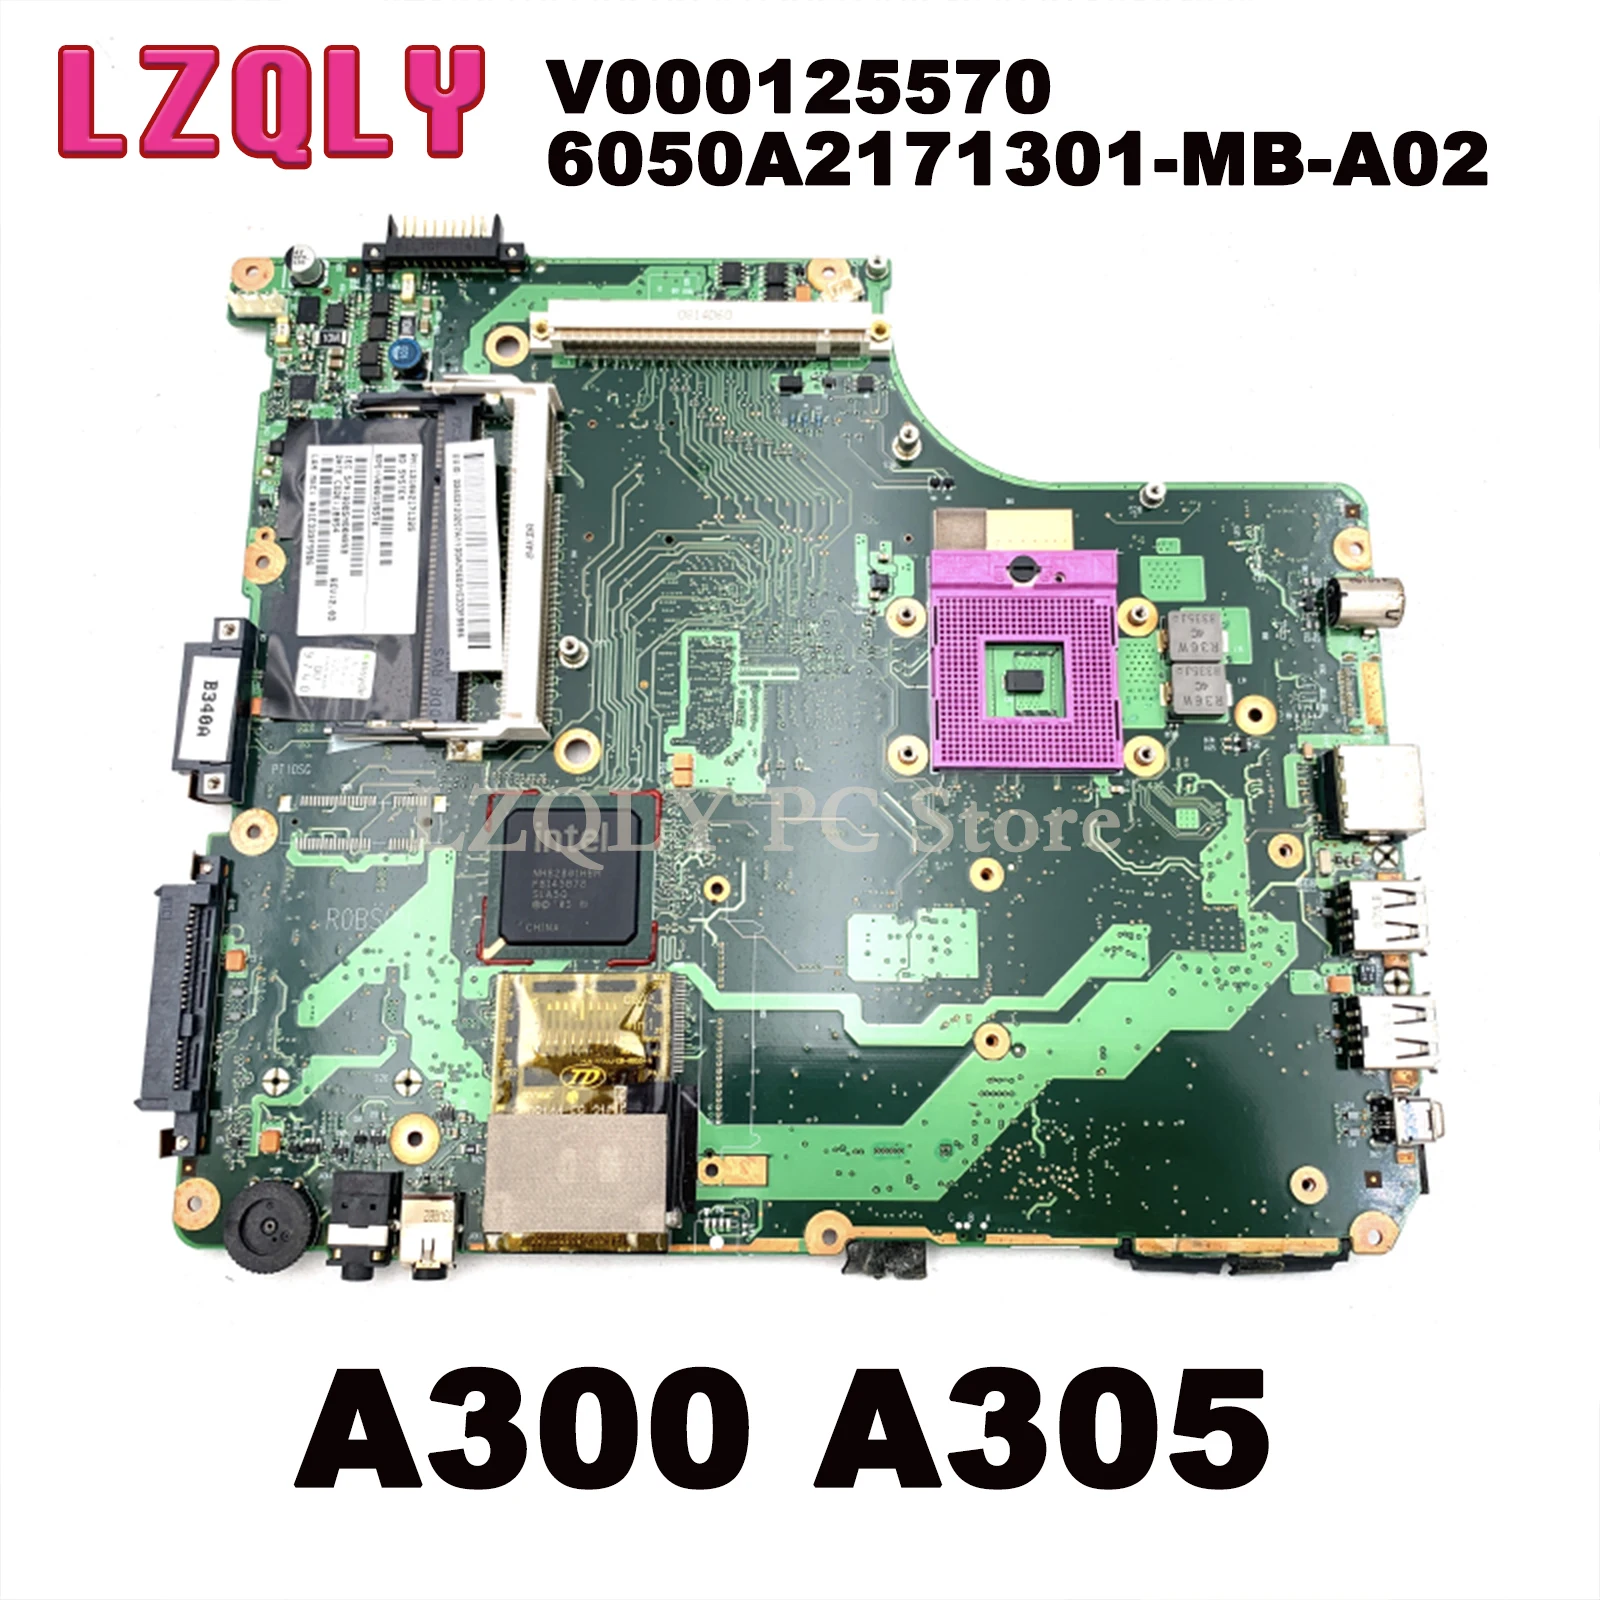 LZQLY V000125570 6050A2171301-MB-A02 for TOSHIBA Satellite A300 A305 laptop motherboard 965PM DDR2 with graphics slot